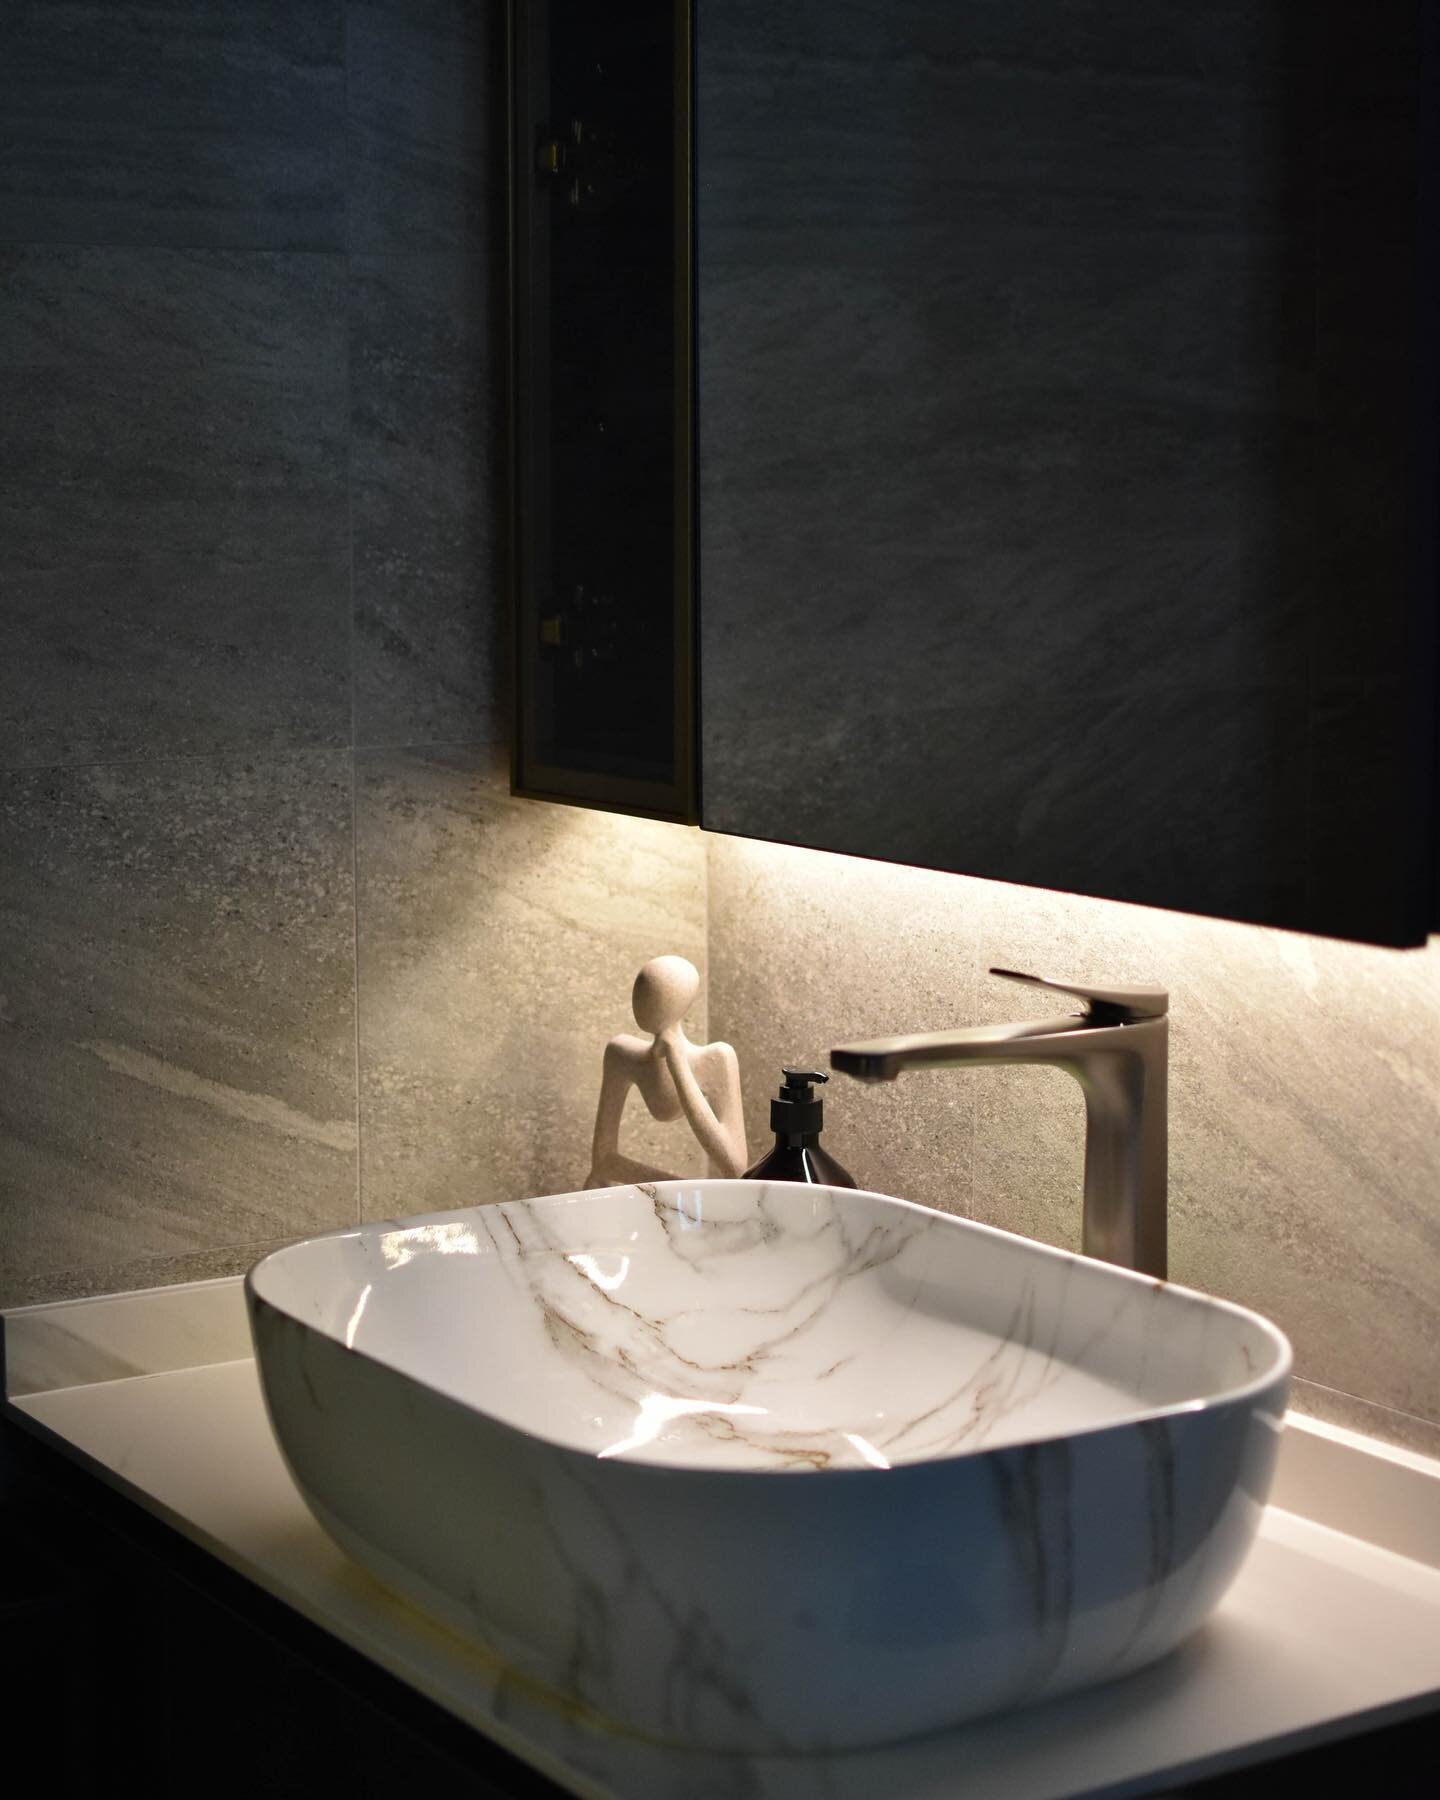 Pairing stone and marble finishes, you can further elevate your bathroom by incorporating ambient lighting and a small glass display area to showcase your perfume collection🔮